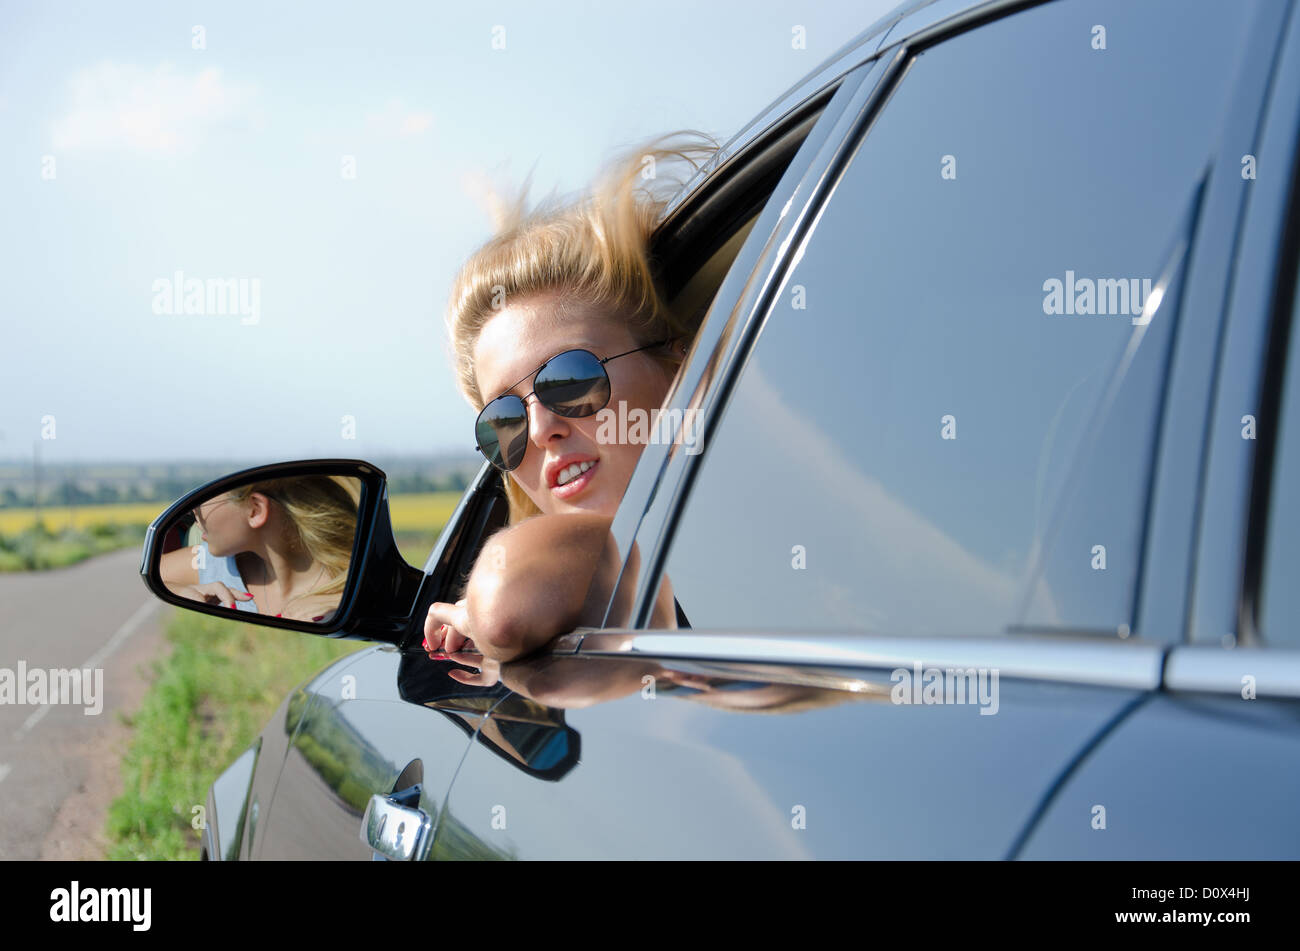 Attractive blonde woman wearing sunglasses leaning out looking back out of a car window Stock Photo